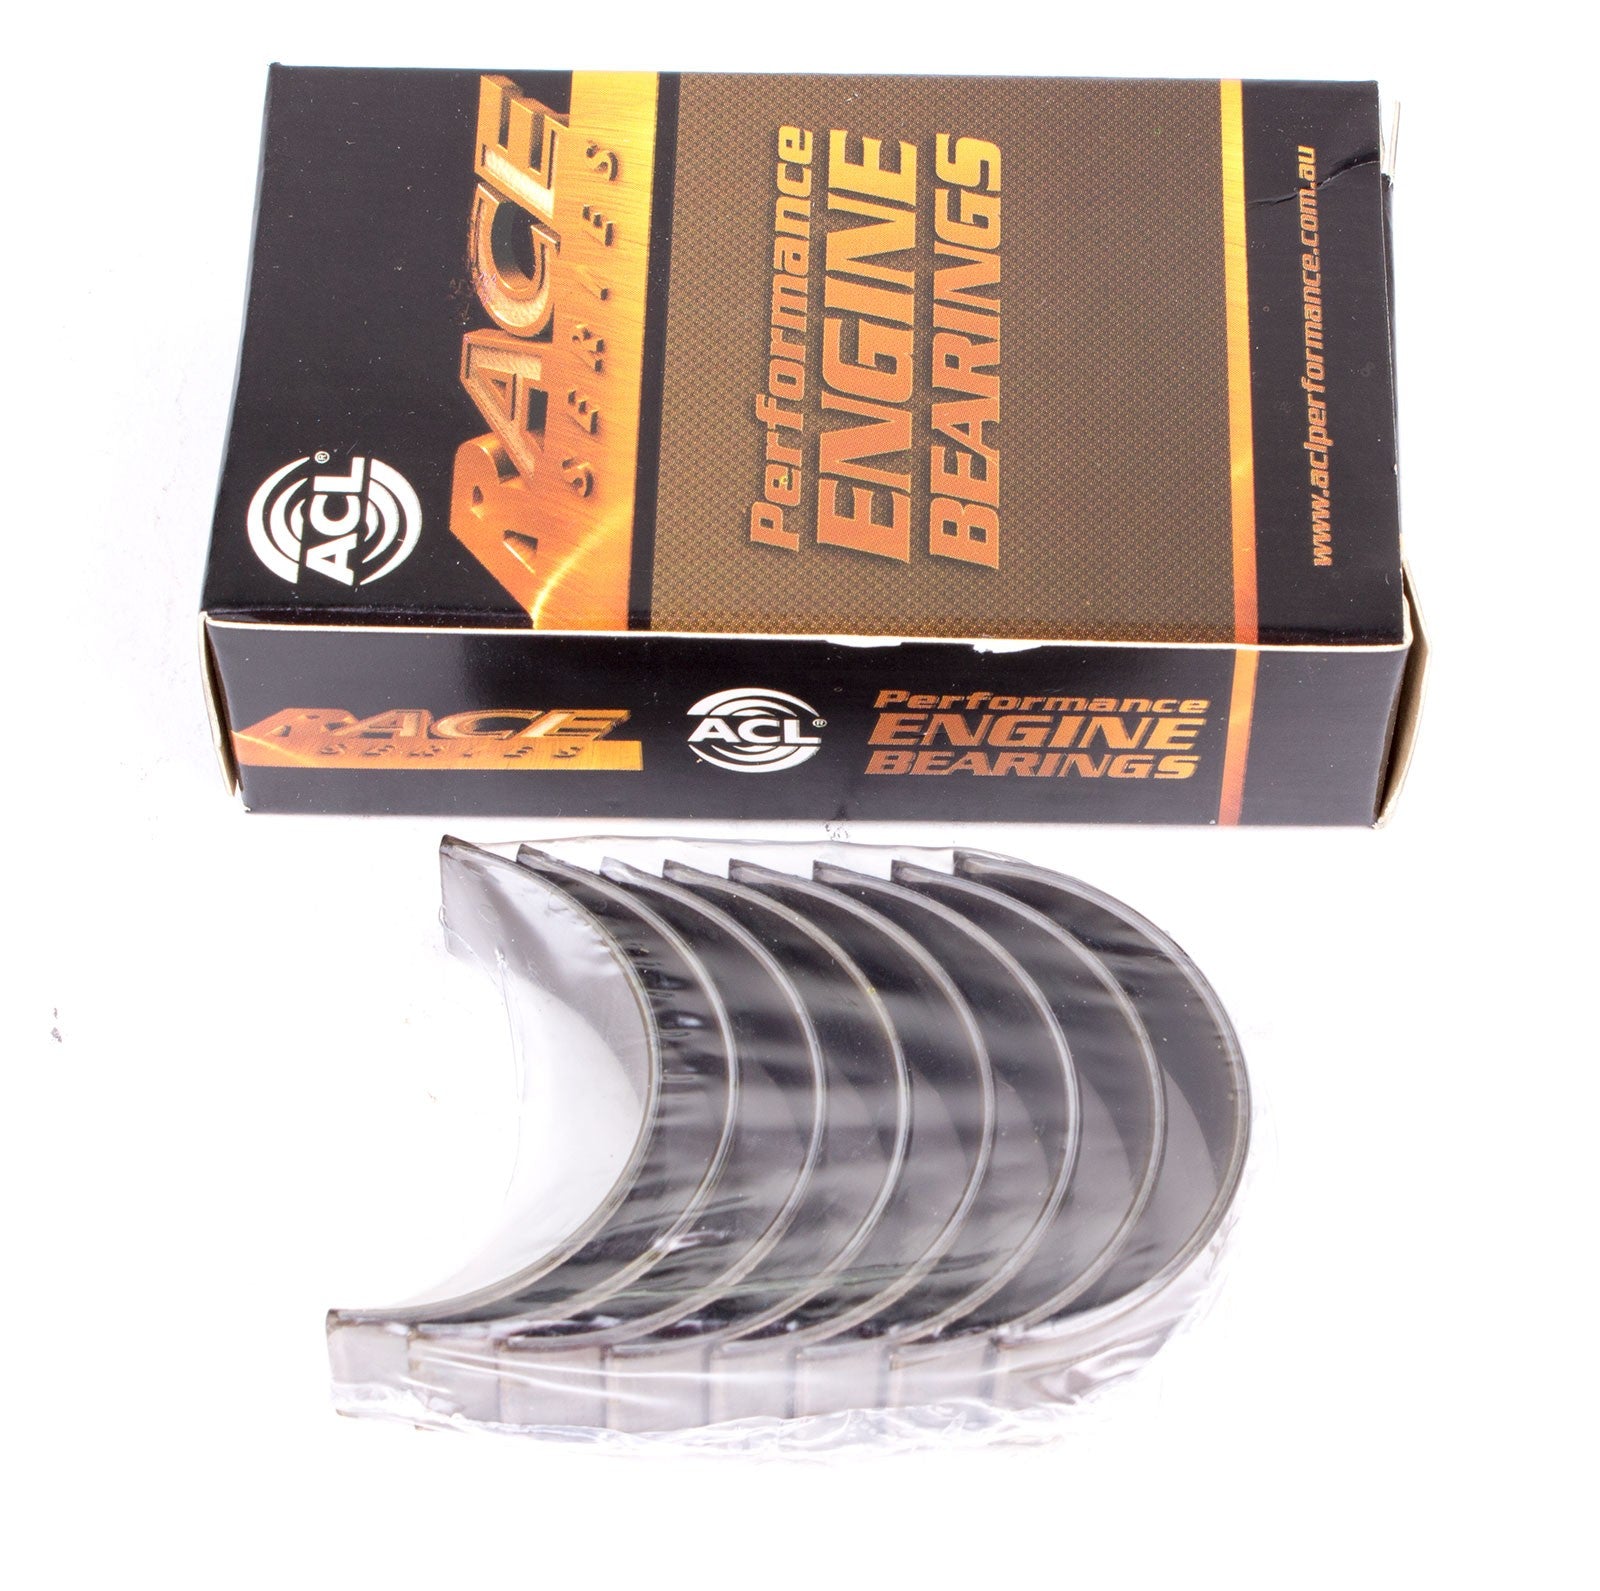 ACL 5M7788H-.25 Main bearing set (ACL Race Series) Photo-0 